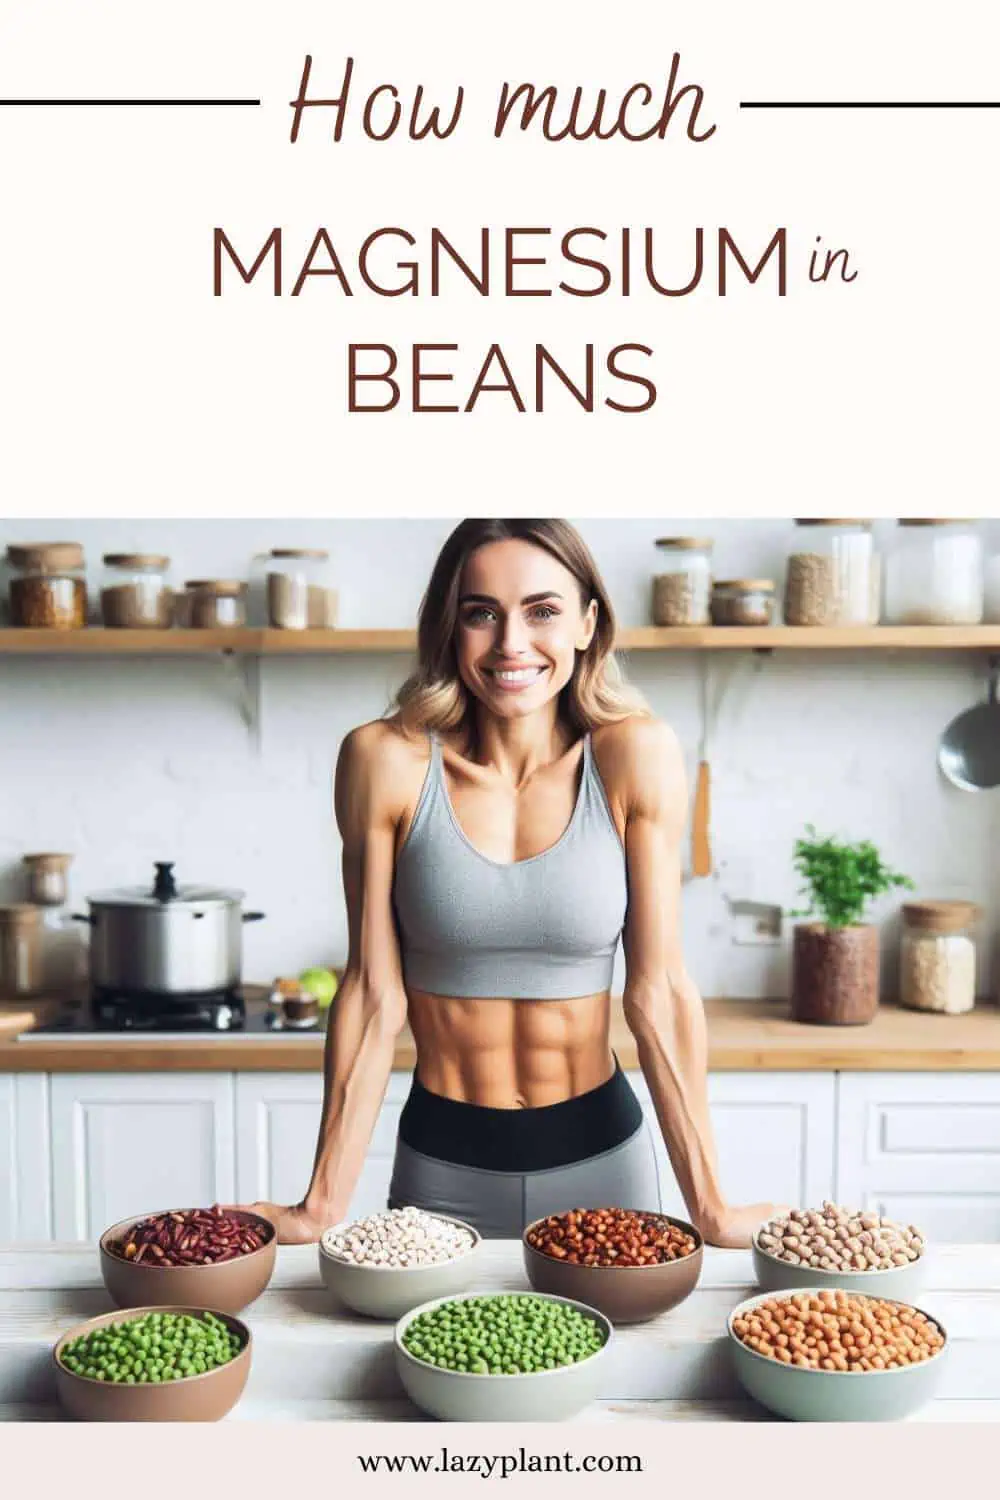 Beans are among the richest foods in magnesium.